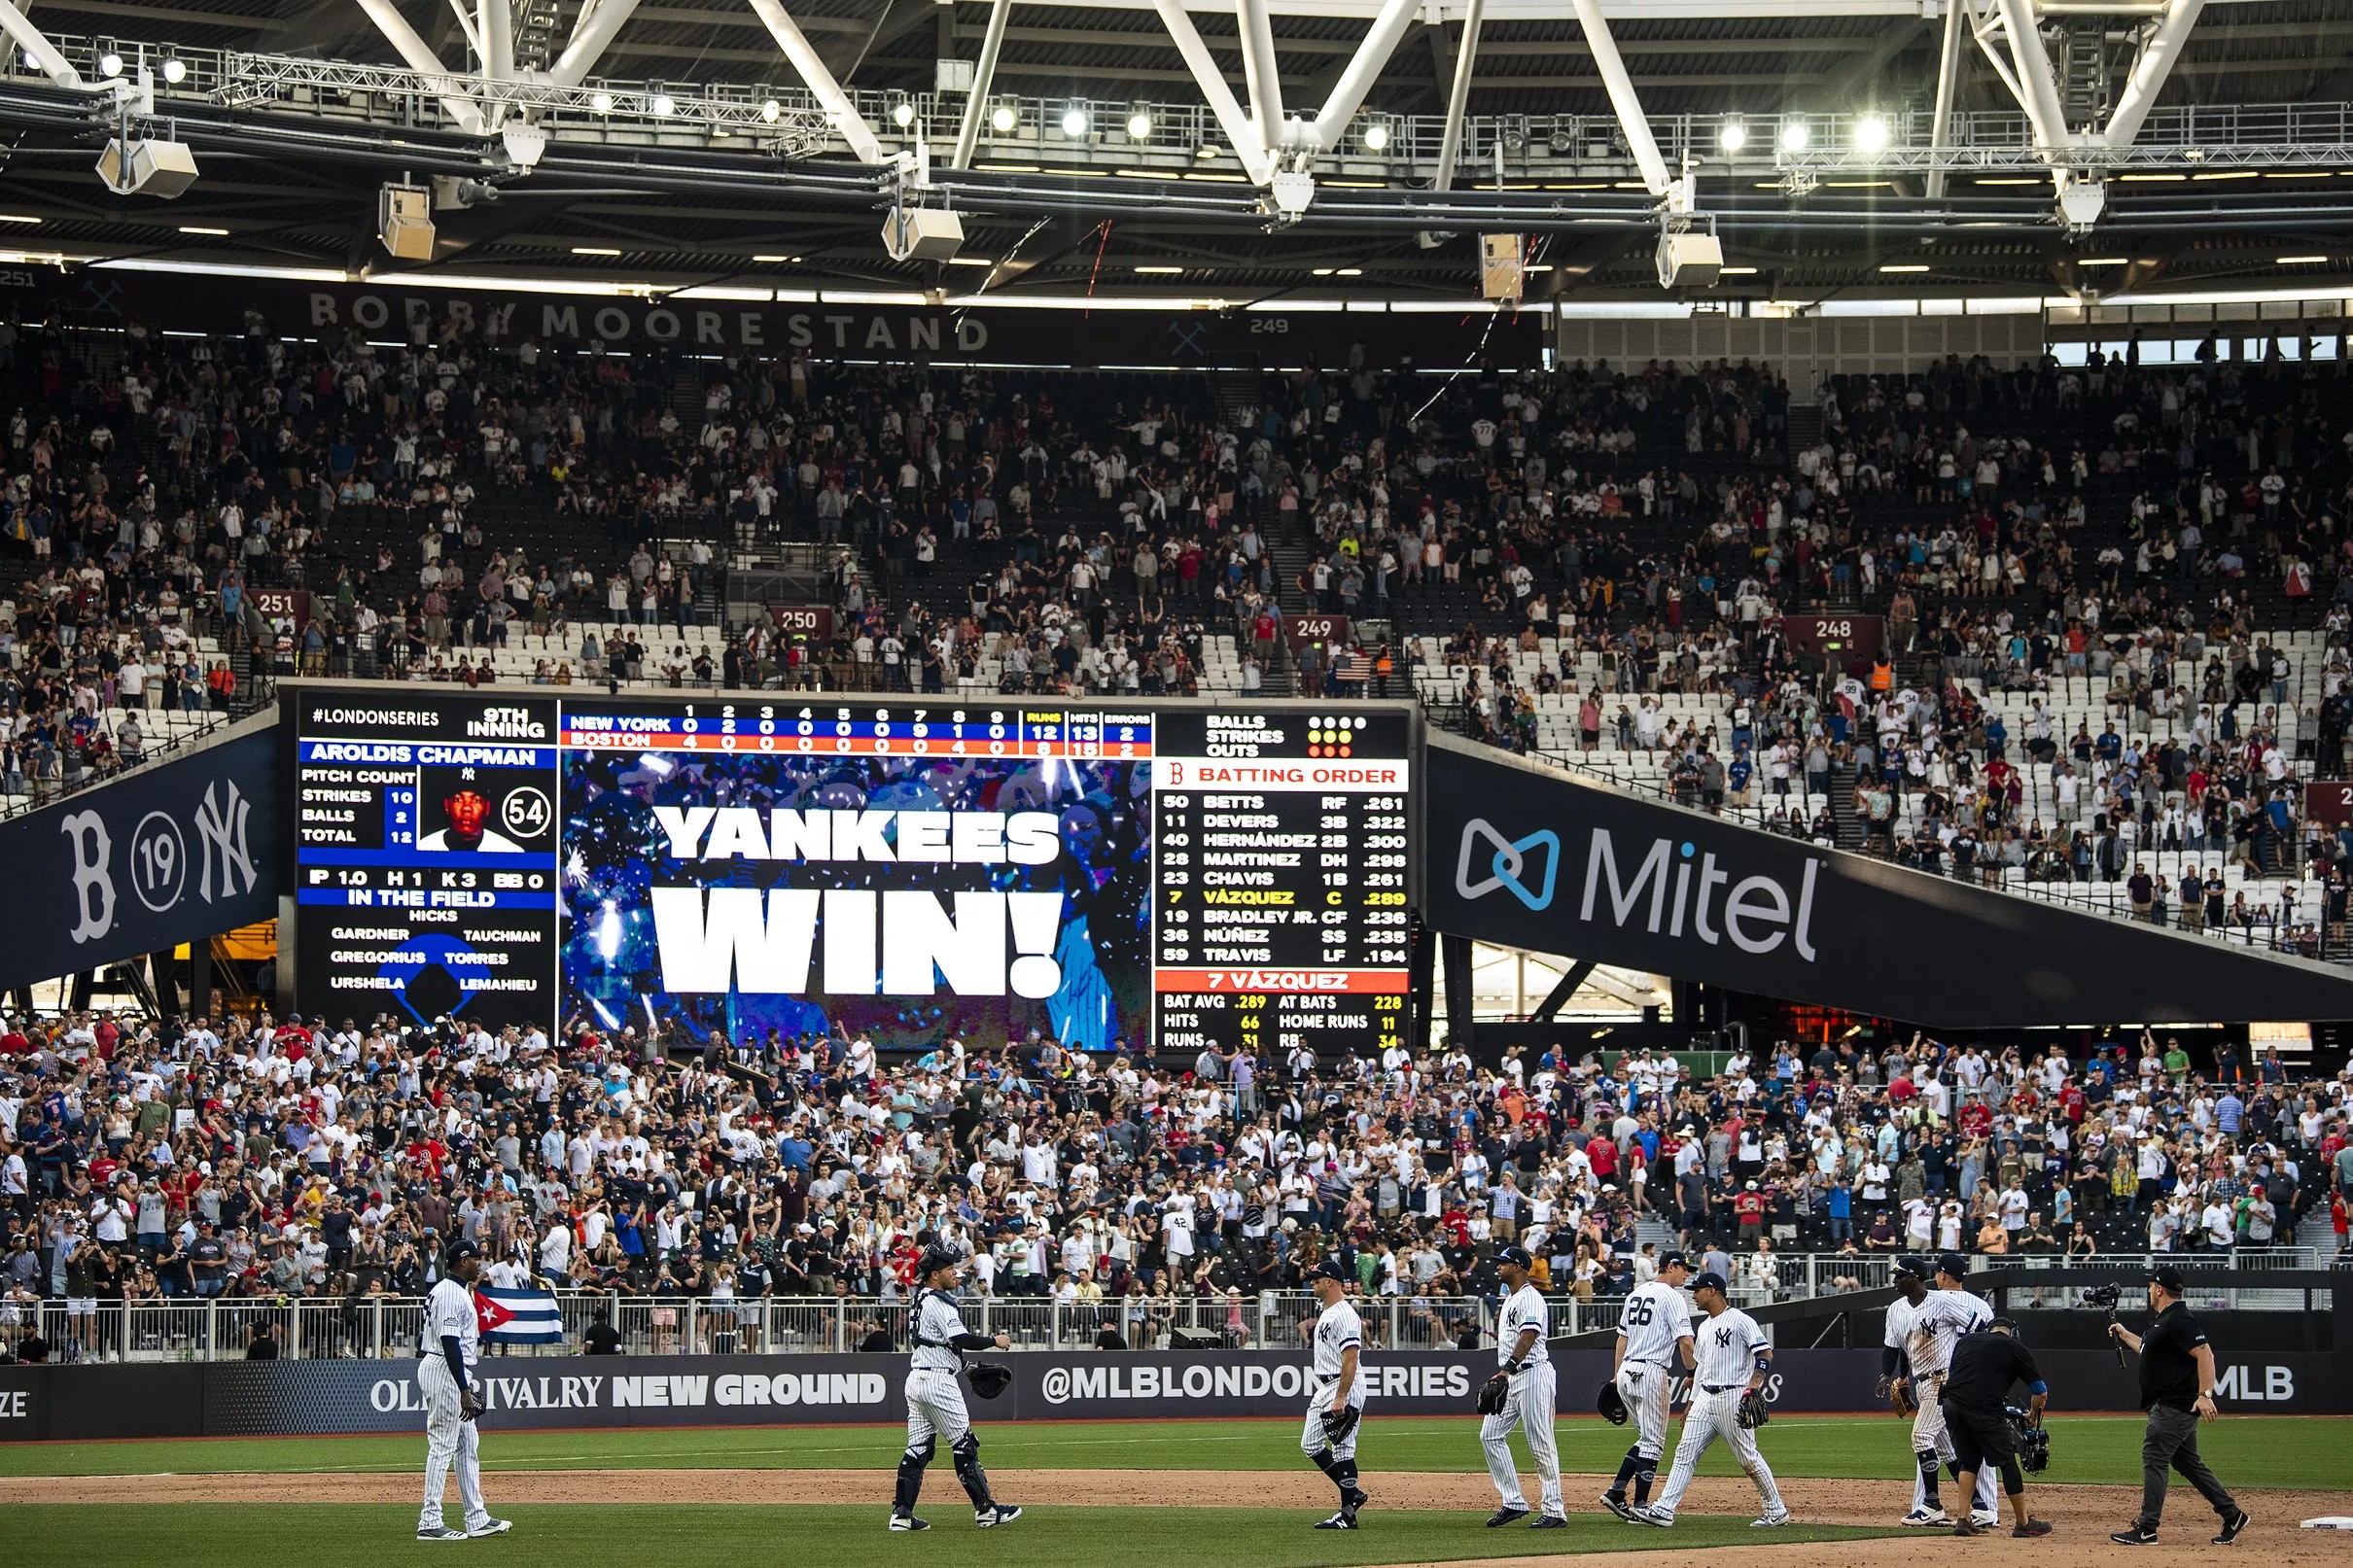 The Yankees could benefit from neutral site games